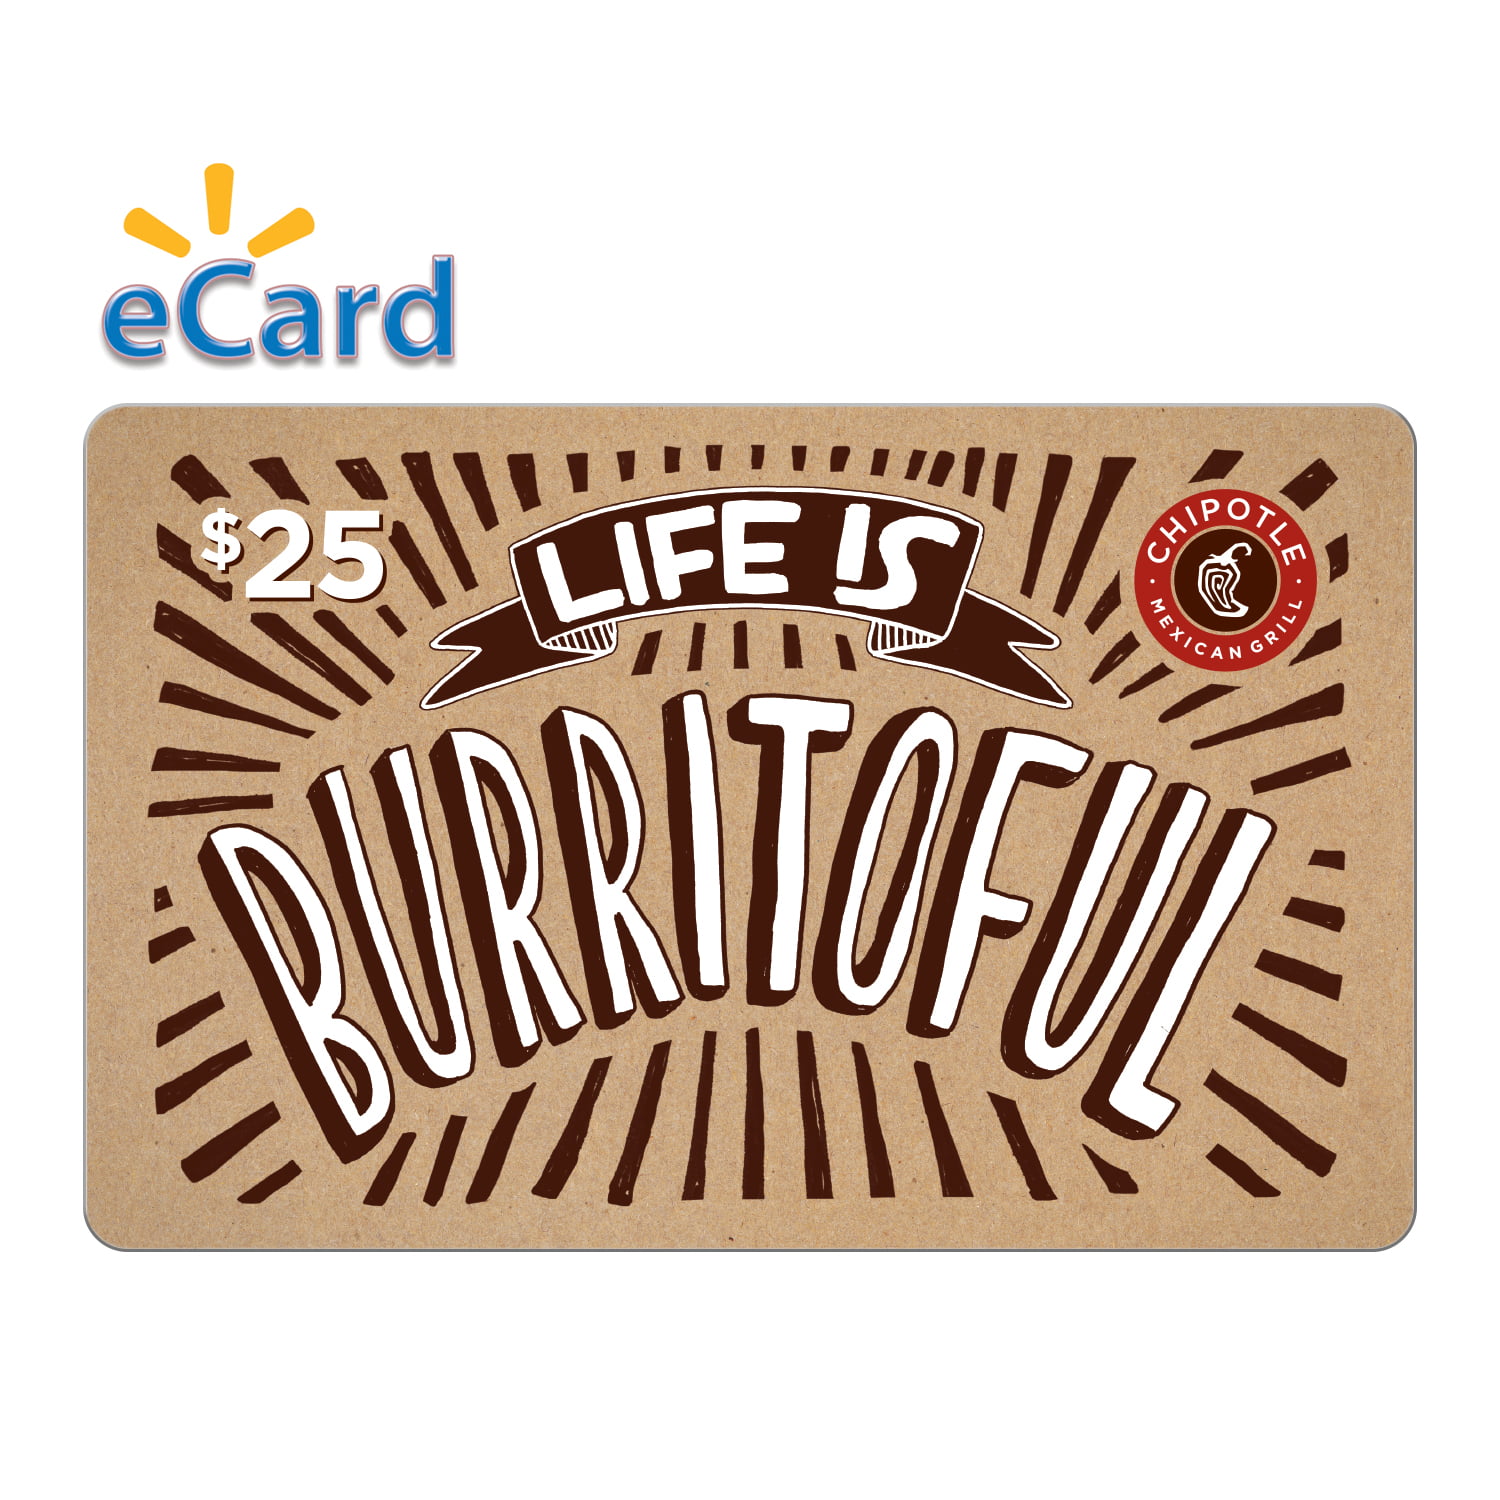 2015 CHIPOTLE GIFT CARD LENTICULAR BURRITO BOWL OF VEGGIES COLLECTIBLE NEW 